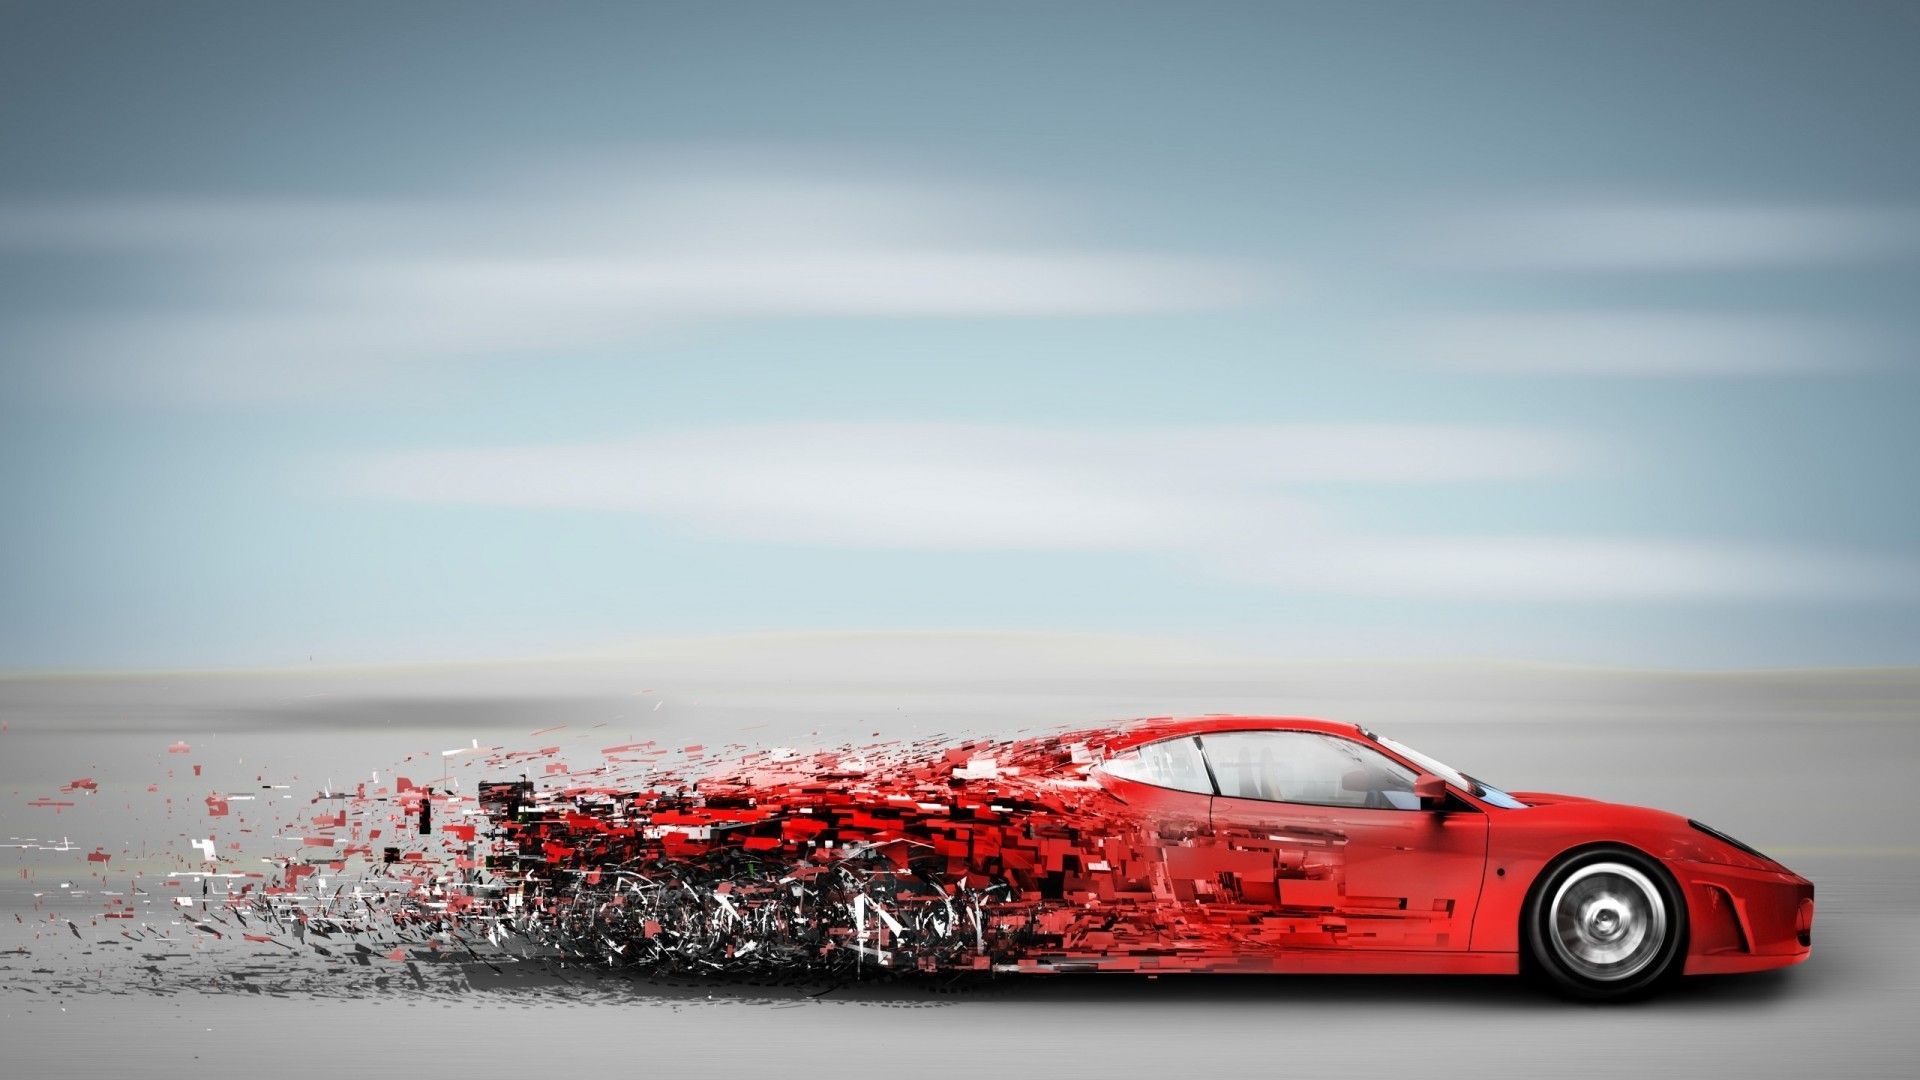 Abstract Car Wallpaper Free Abstract Car Background